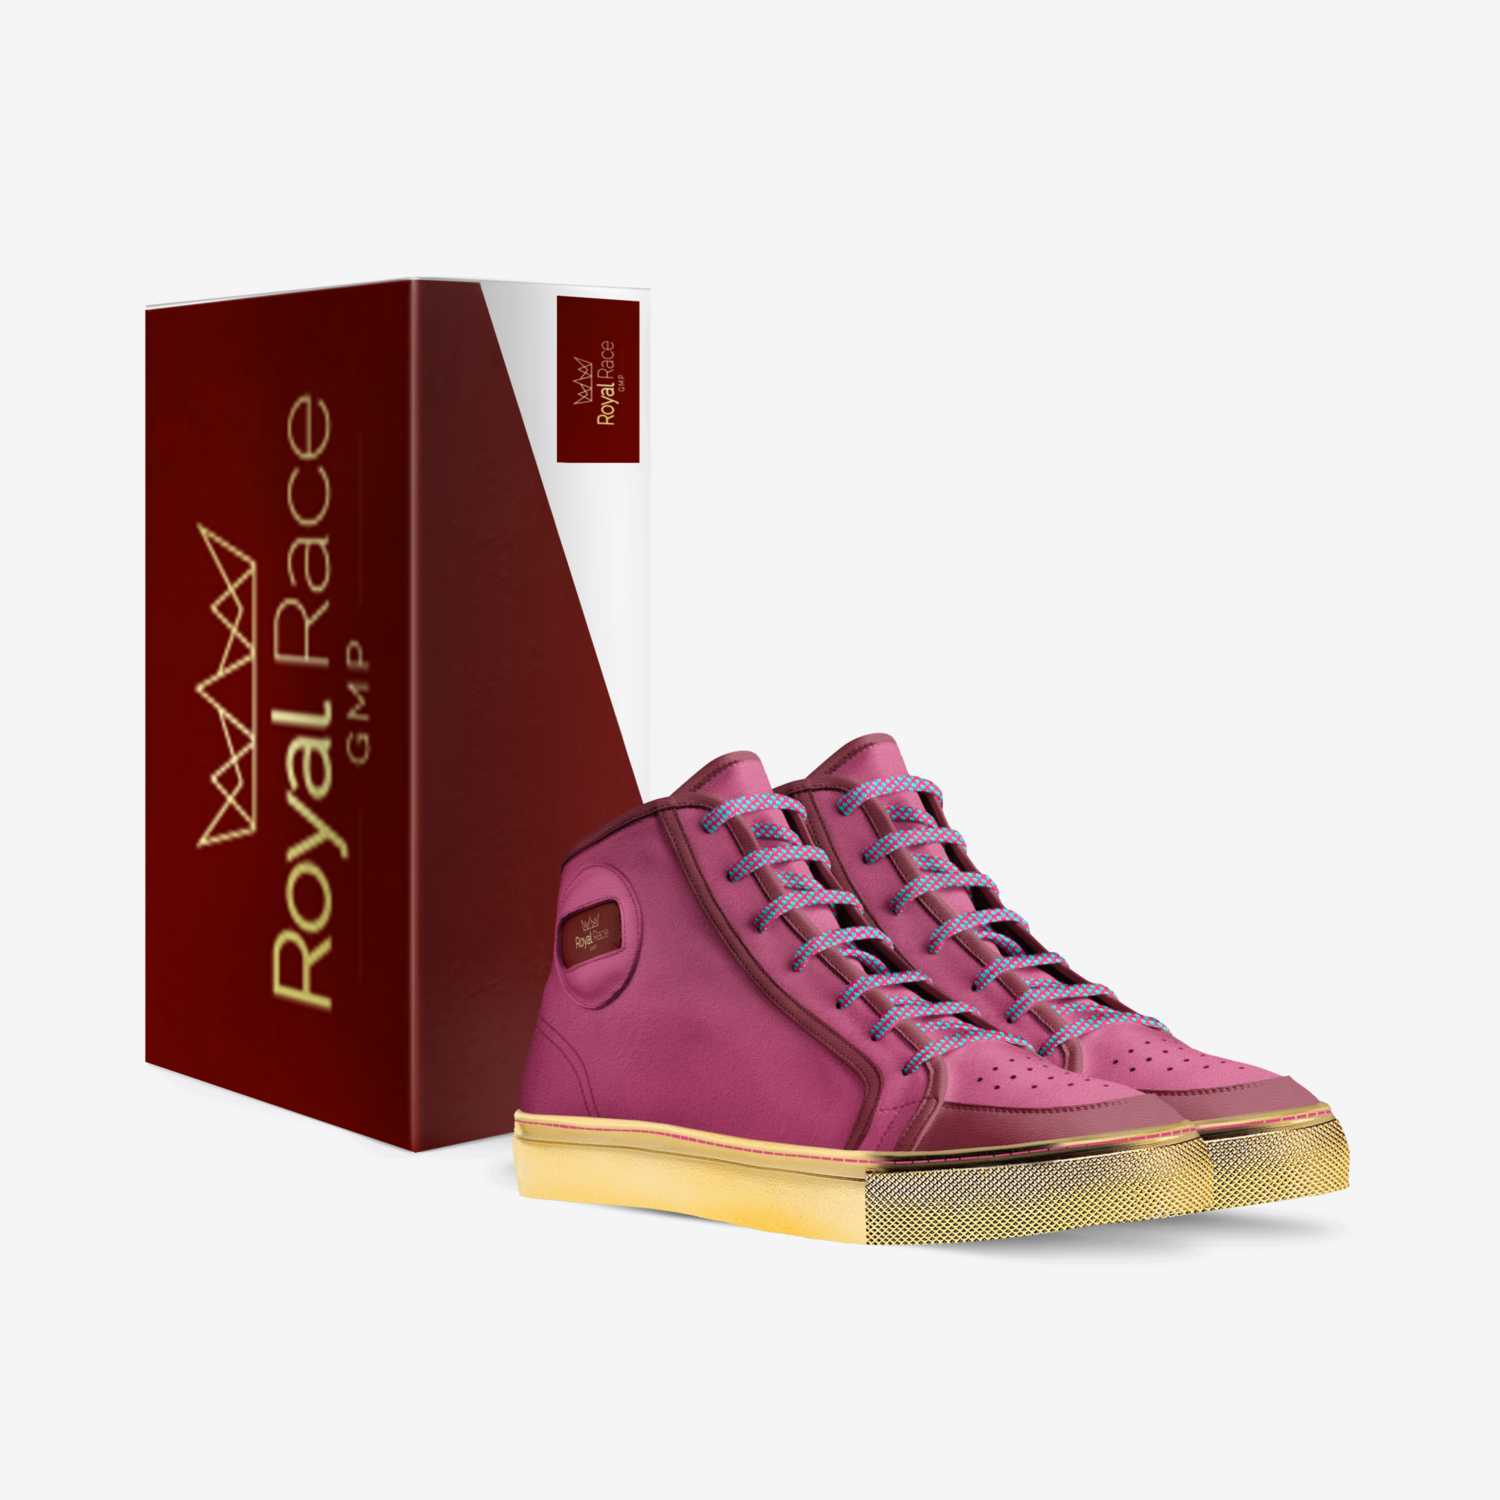 ROYAL RACE GMP custom made in Italy shoes by Guebli Carron | Box view